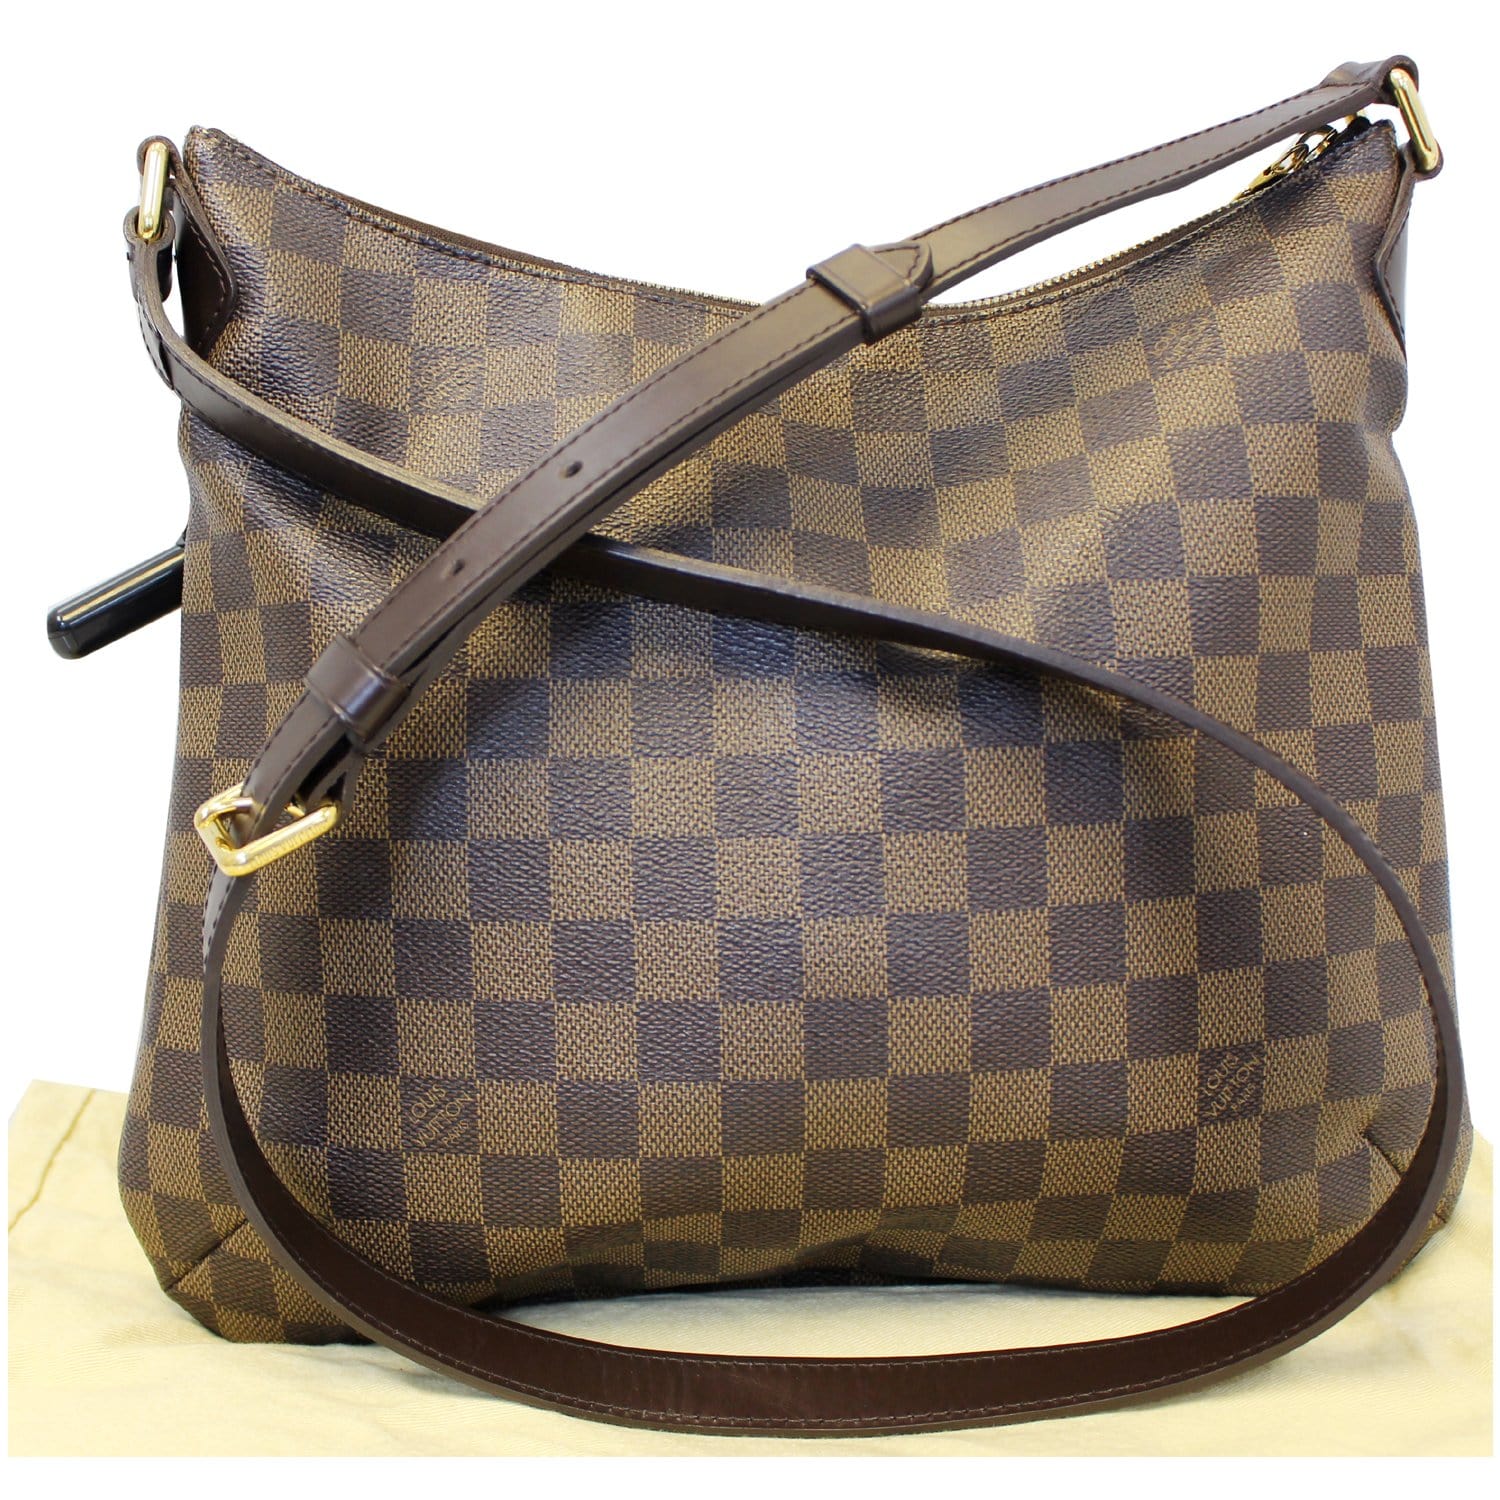 Shop for Louis Vuitton Damier Ebene Canvas Leather Illovo PM - Shipped from  USA